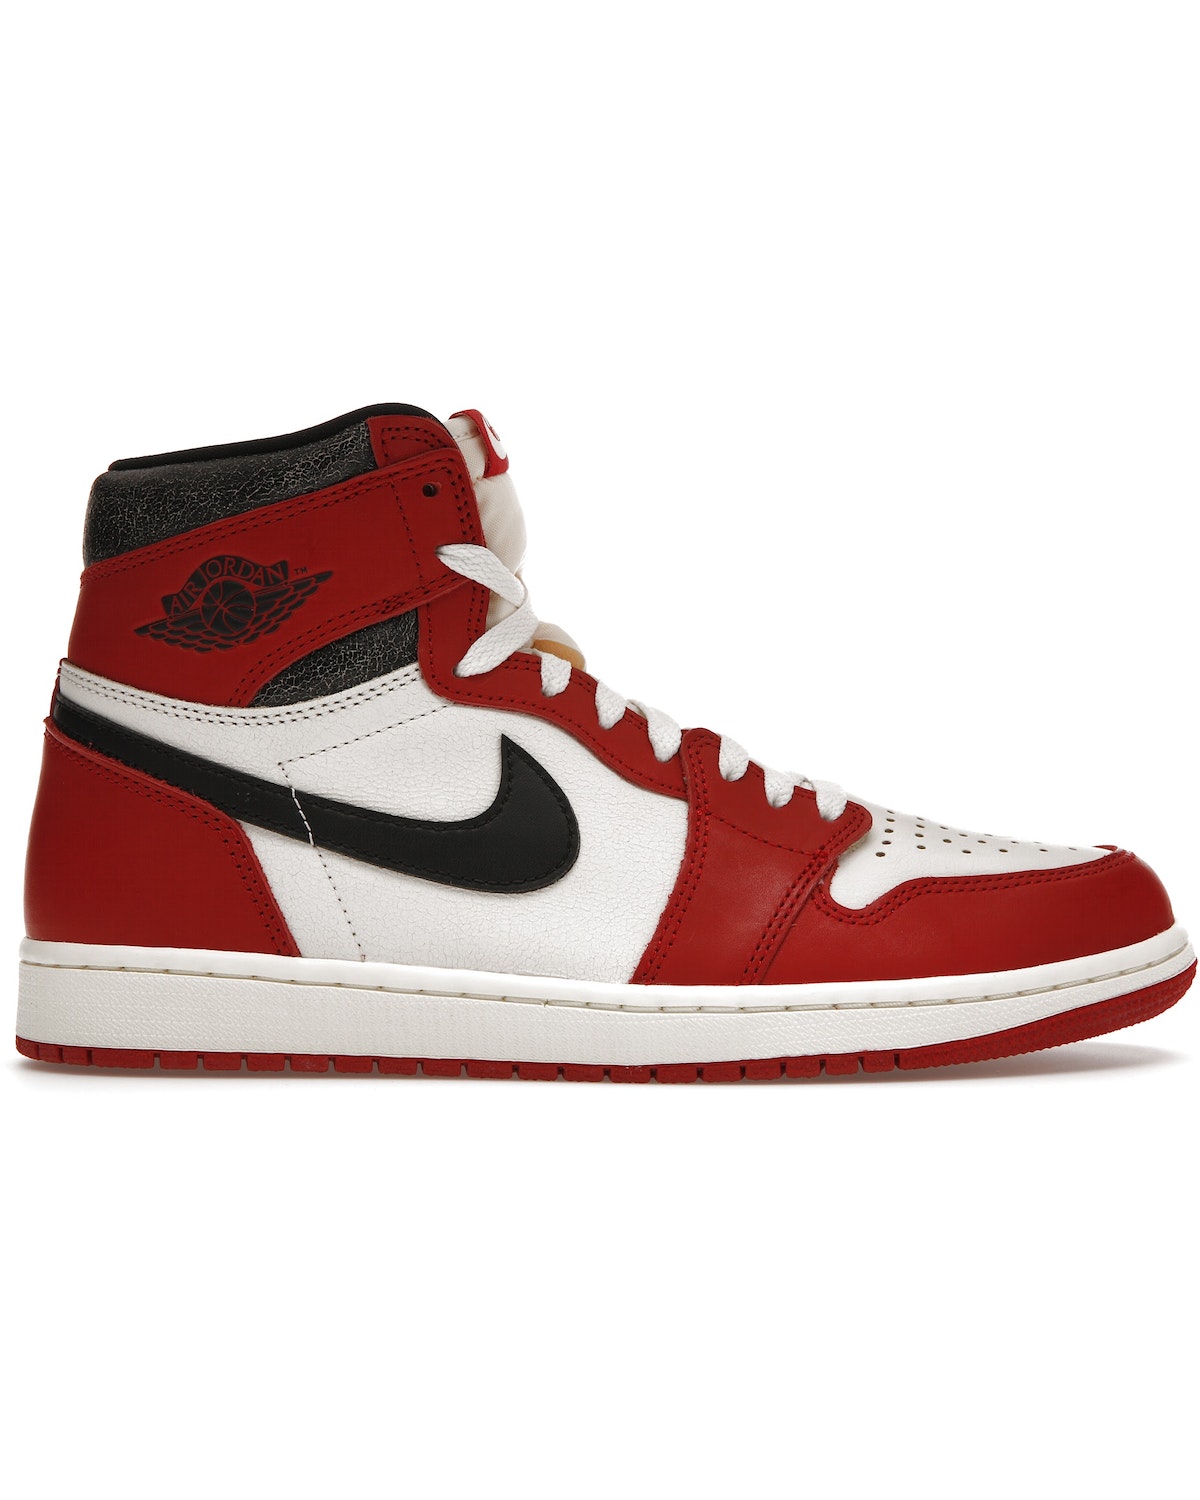 Air Jordan 1 Retro High OG Chicago Lost and Found - Dropsy.Store